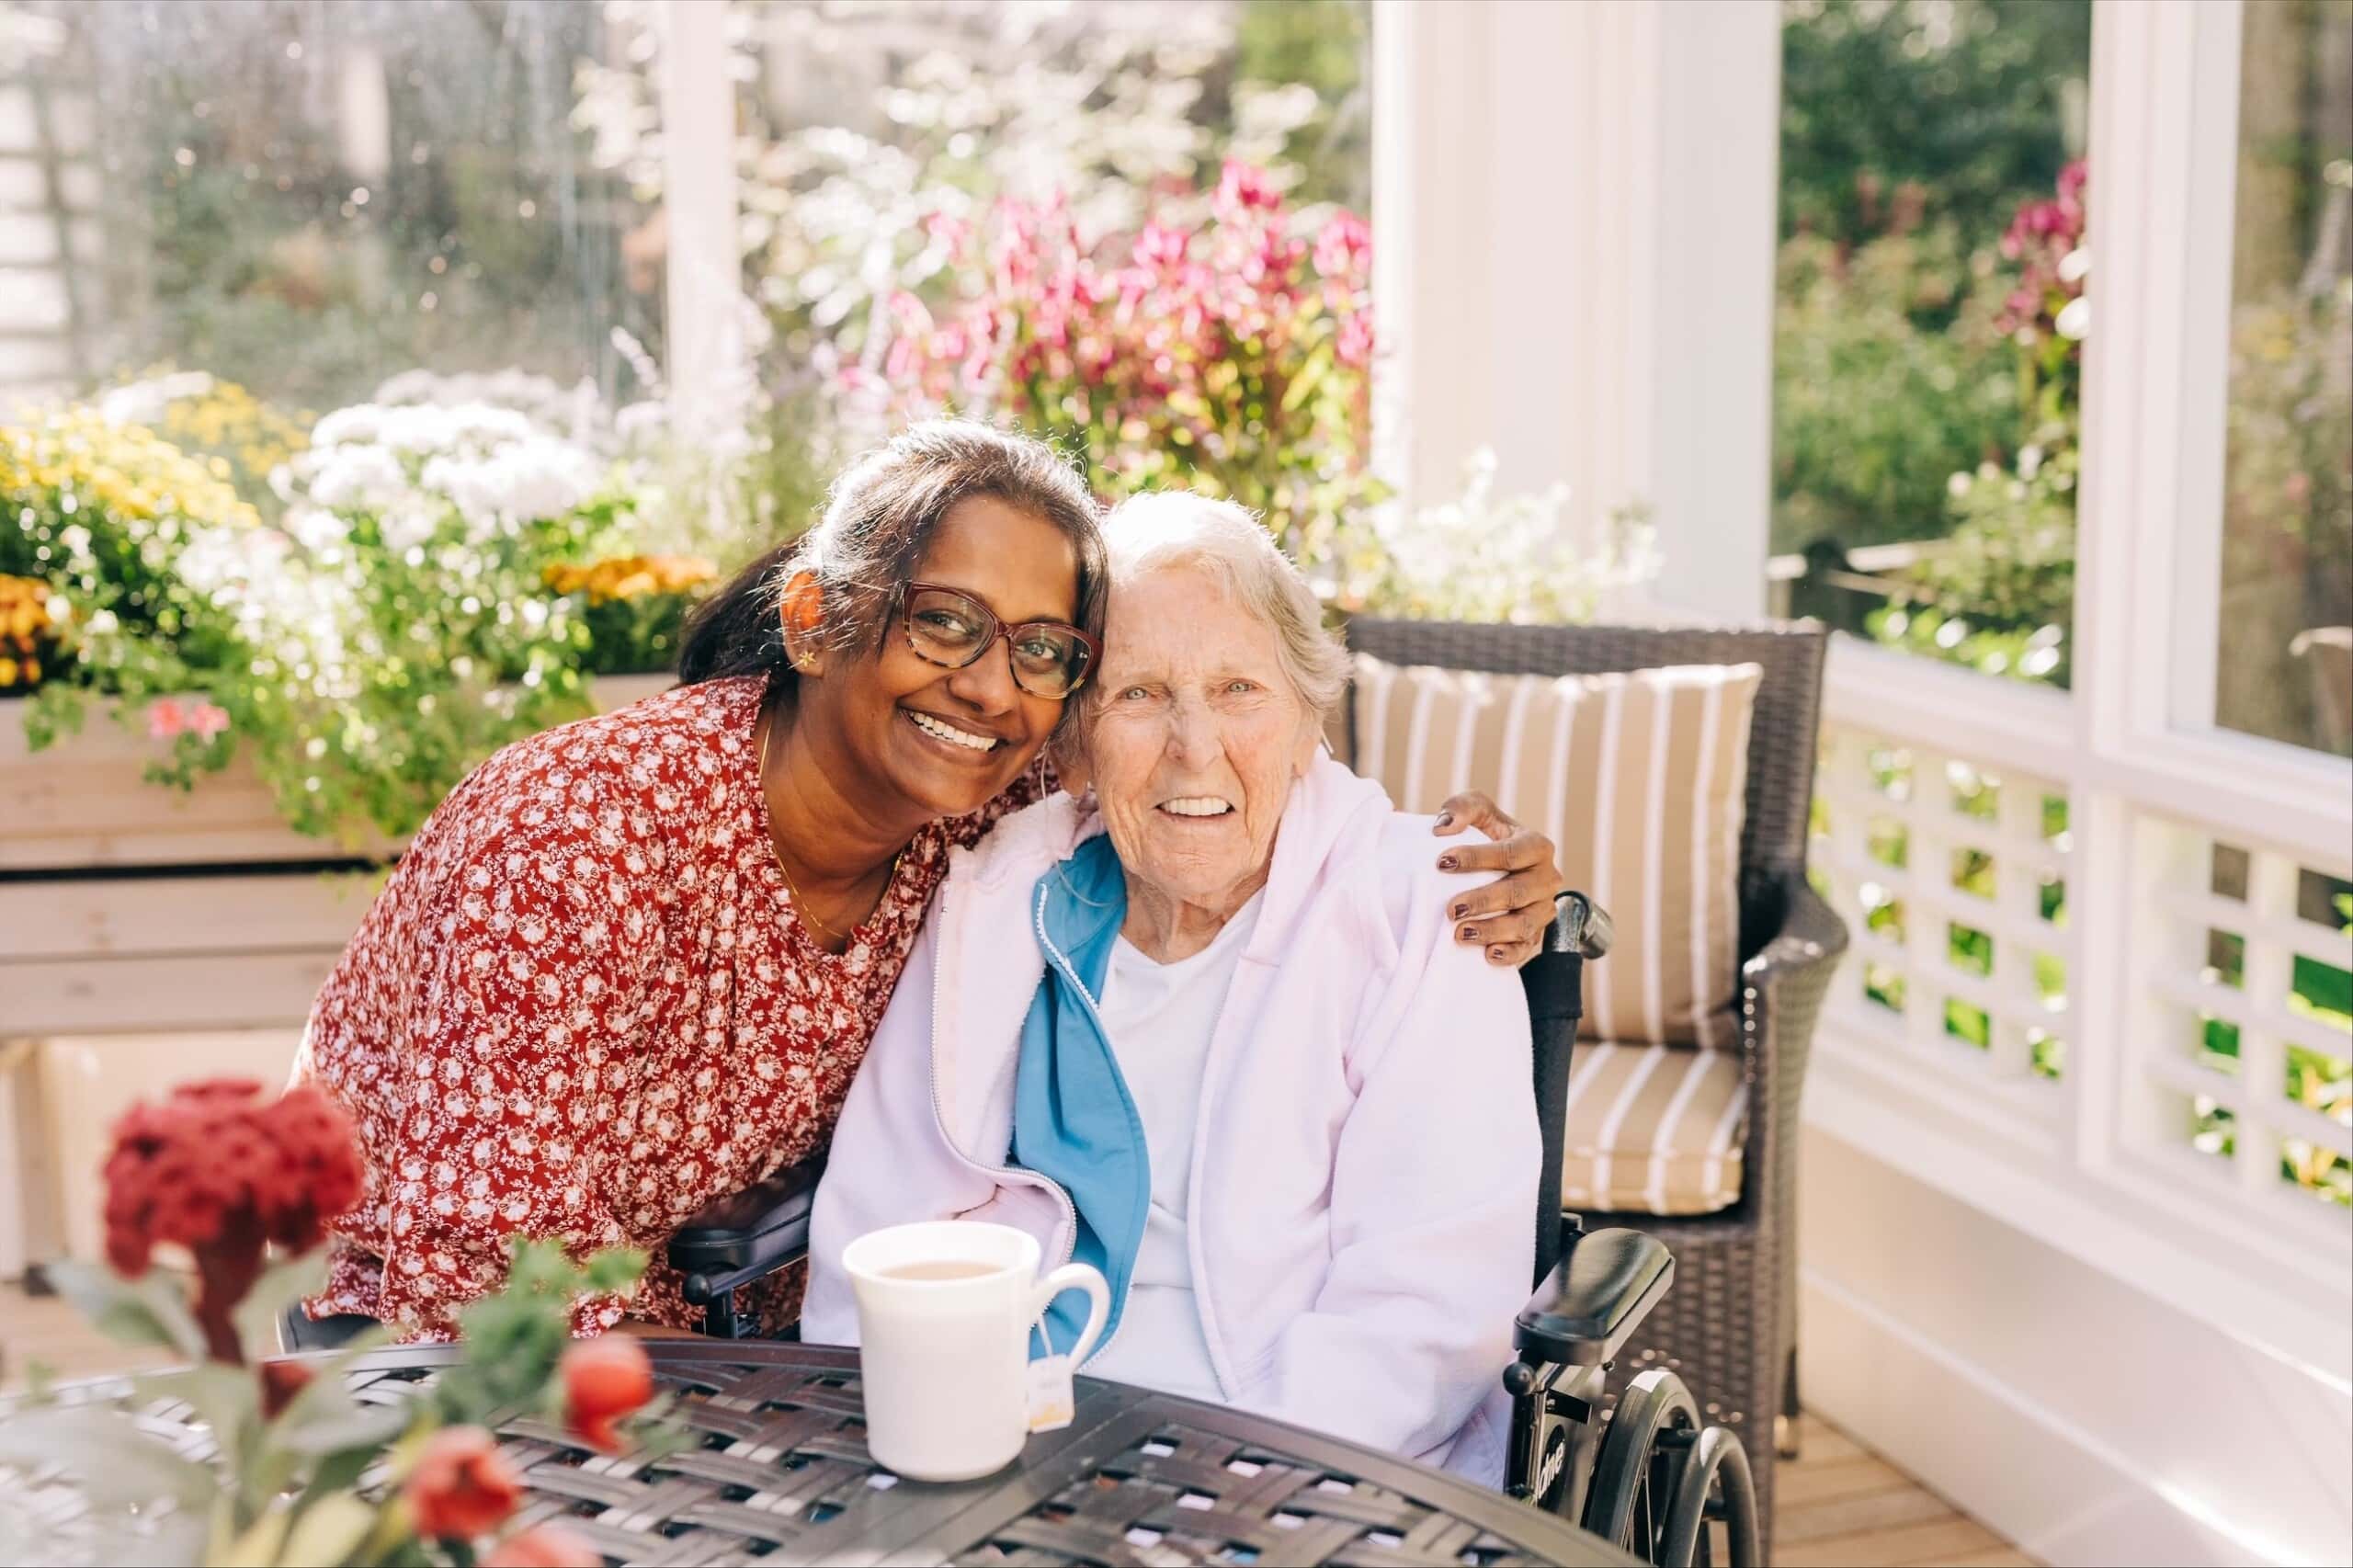 care partner and resident smiling in garden patio